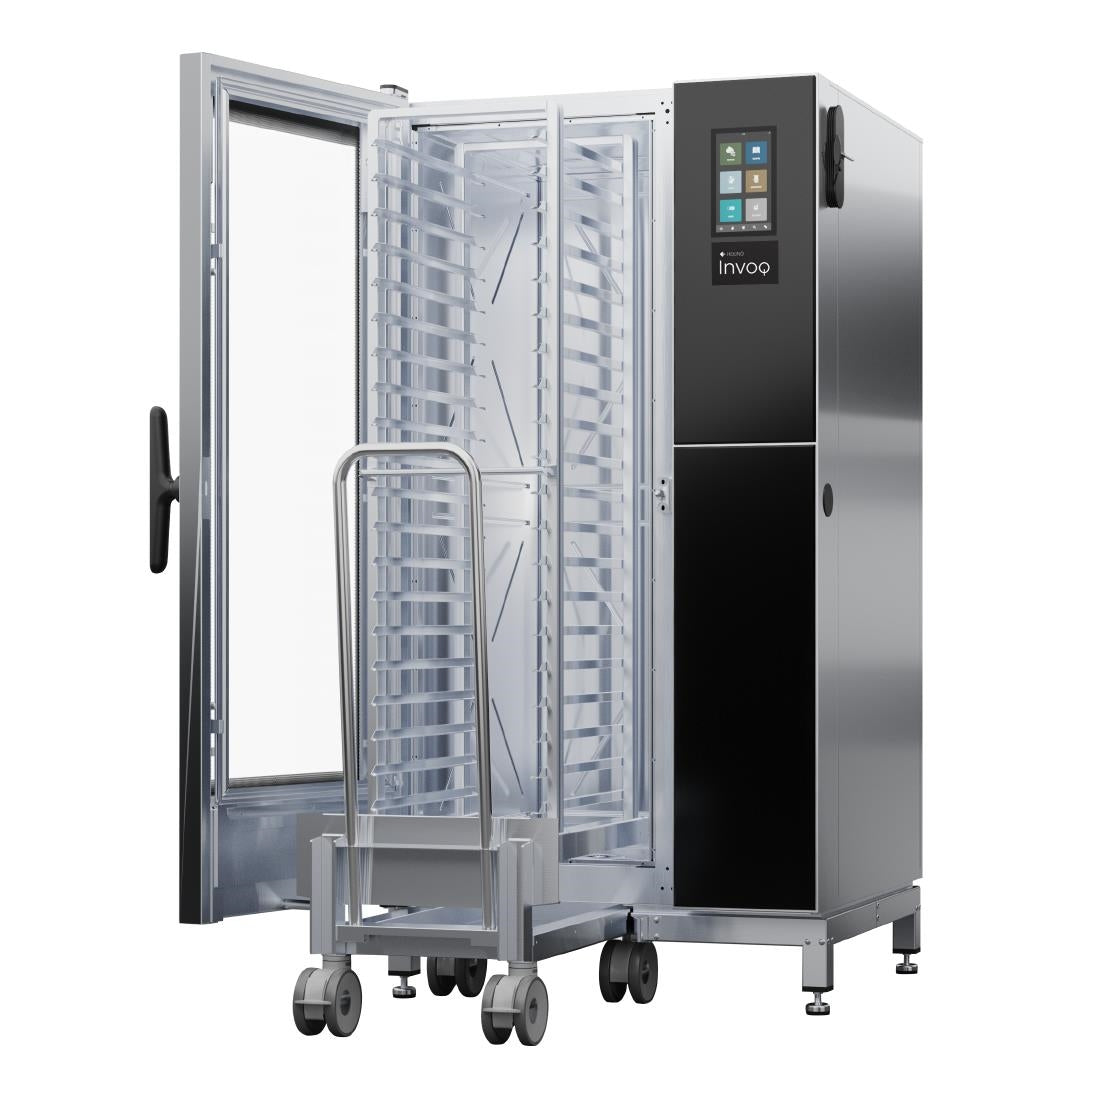 CX489 Houno Invoq Combi Oven Electric 20 Grid 1/1 GN JD Catering Equipment Solutions Ltd